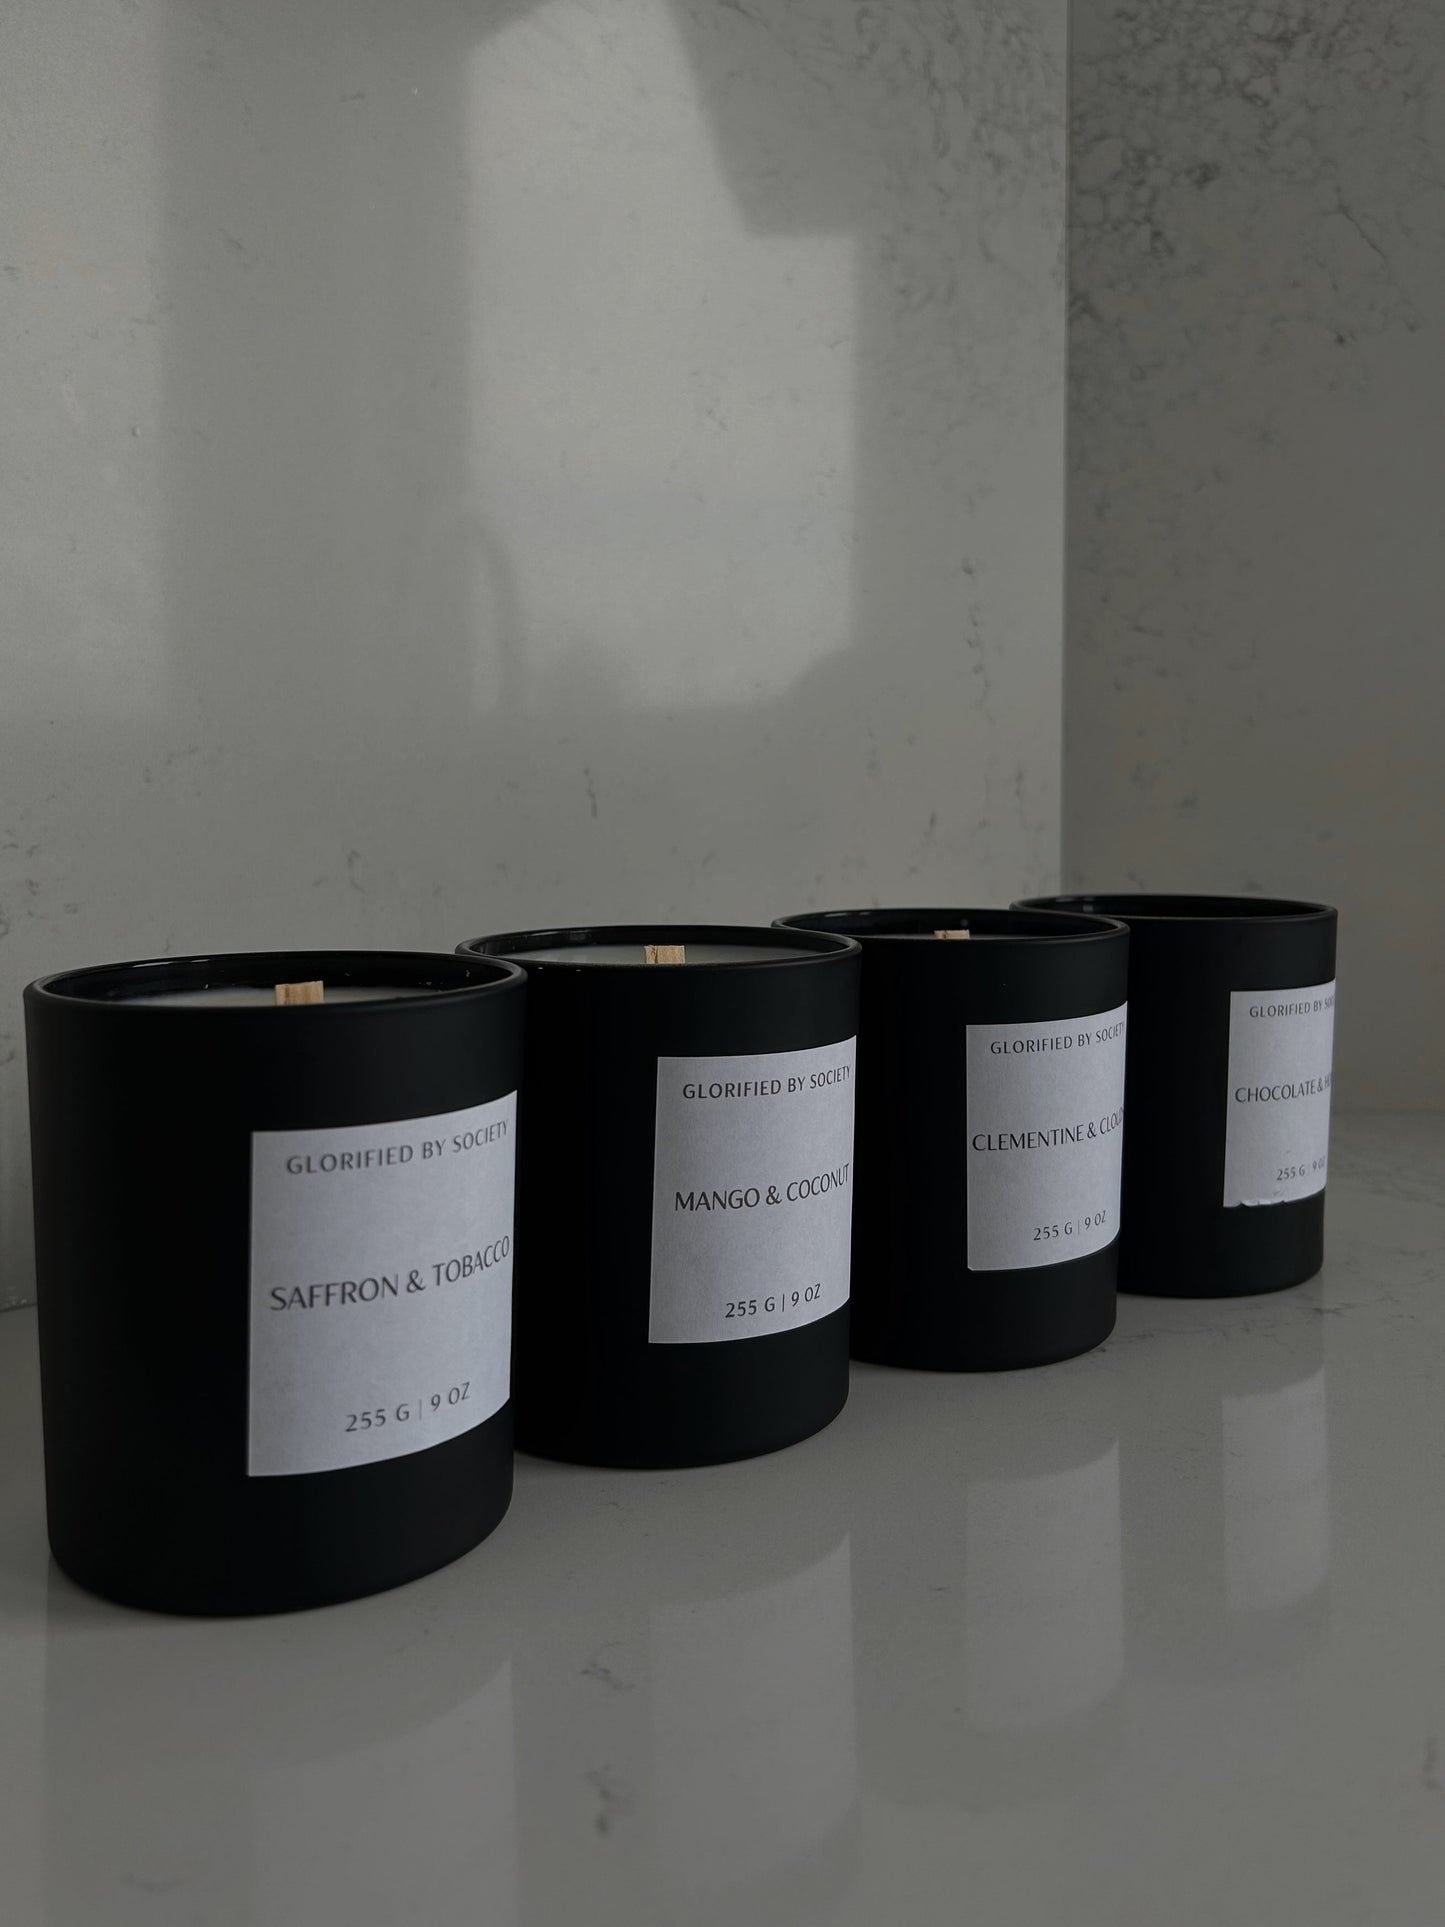 Image of a luxurious scented candle in a black matte glass jar, placed on a marble tray. The candle is made of high-quality coconut soy wax, and its wooden wick is positioned in the center of the jar. The label on the jar features a sleek and sophisticated design, with elegant, minimalist  typography. The candle emits a warm and inviting glow, creating a cozy and relaxing atmosphere in any room.